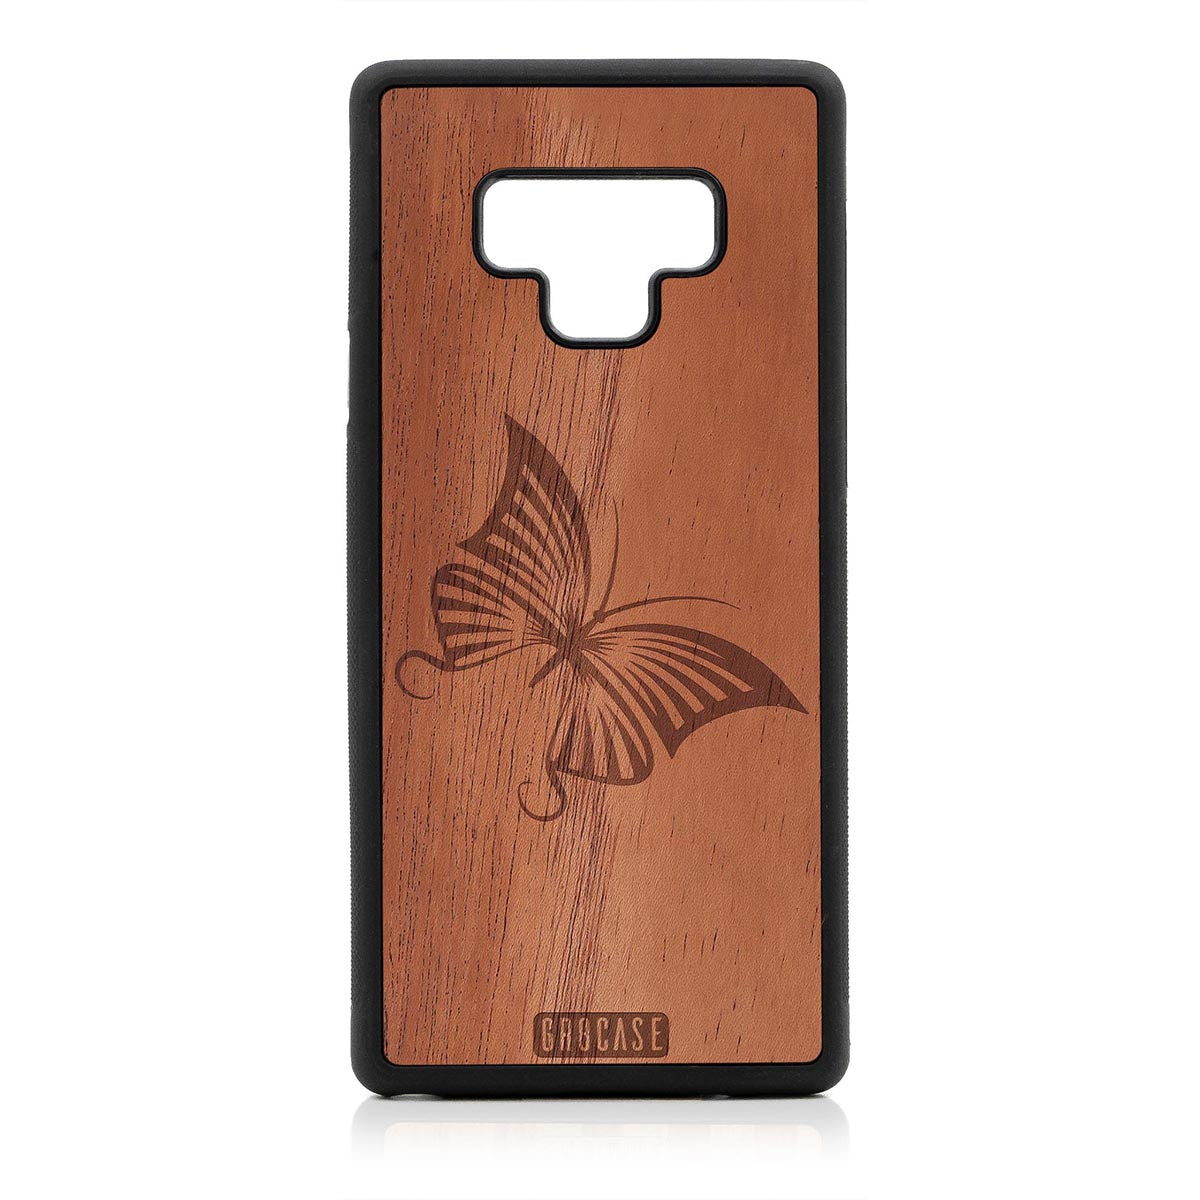 Butterfly Design Wood Case Samsung Galaxy Note 9 by GR8CASE